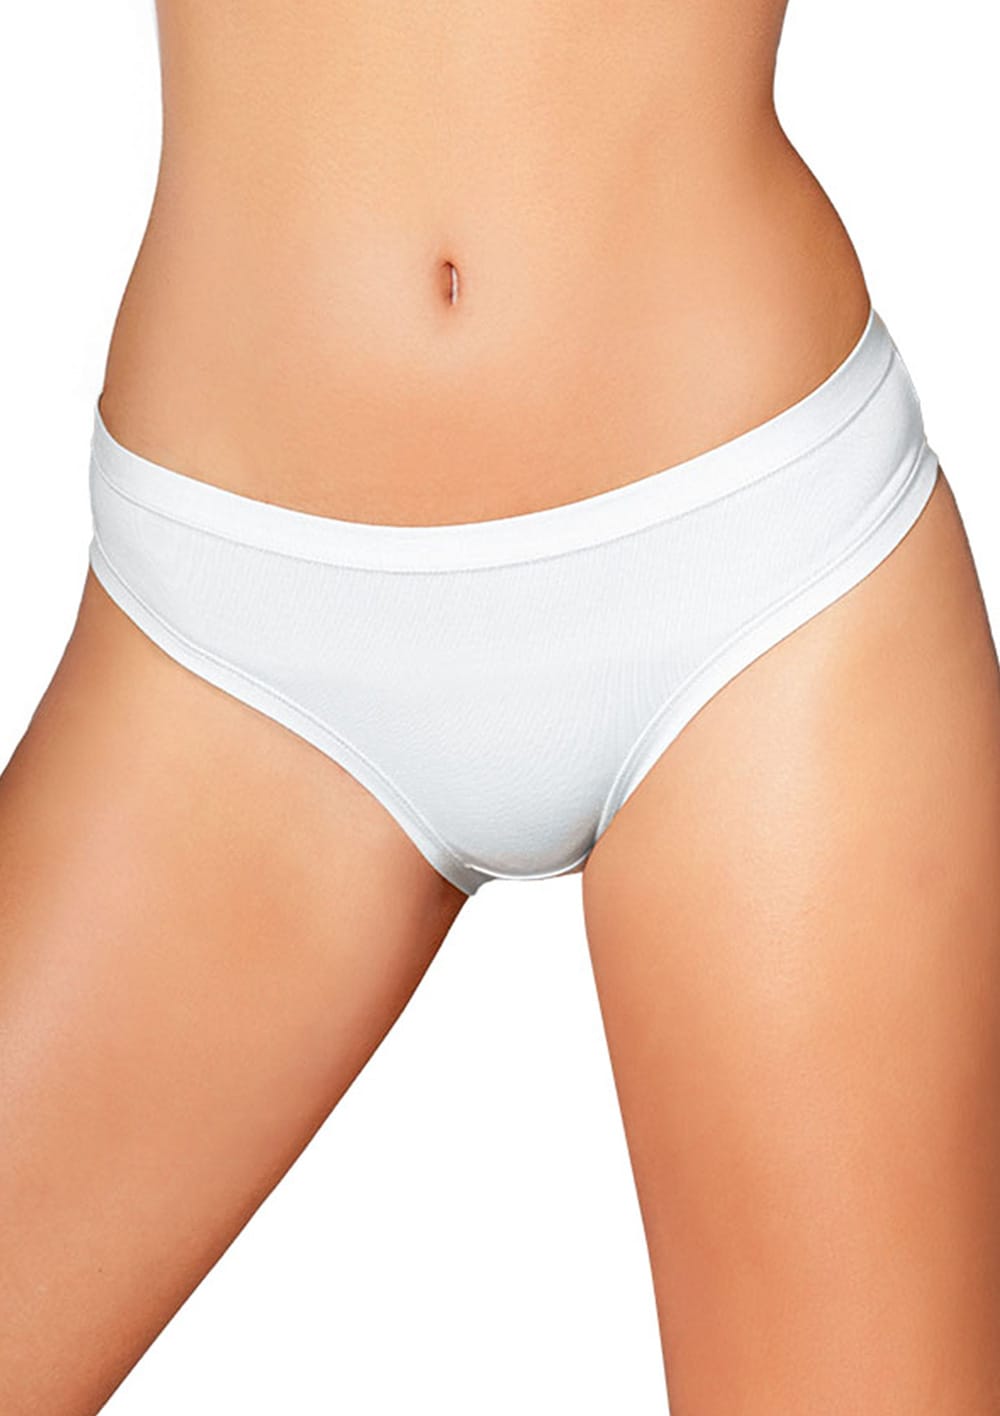 This classic EGi brief is crafted with sublime superior cotton fabric, delivering a fit that's both stretchy and comfortable - ideal for extended wear. 